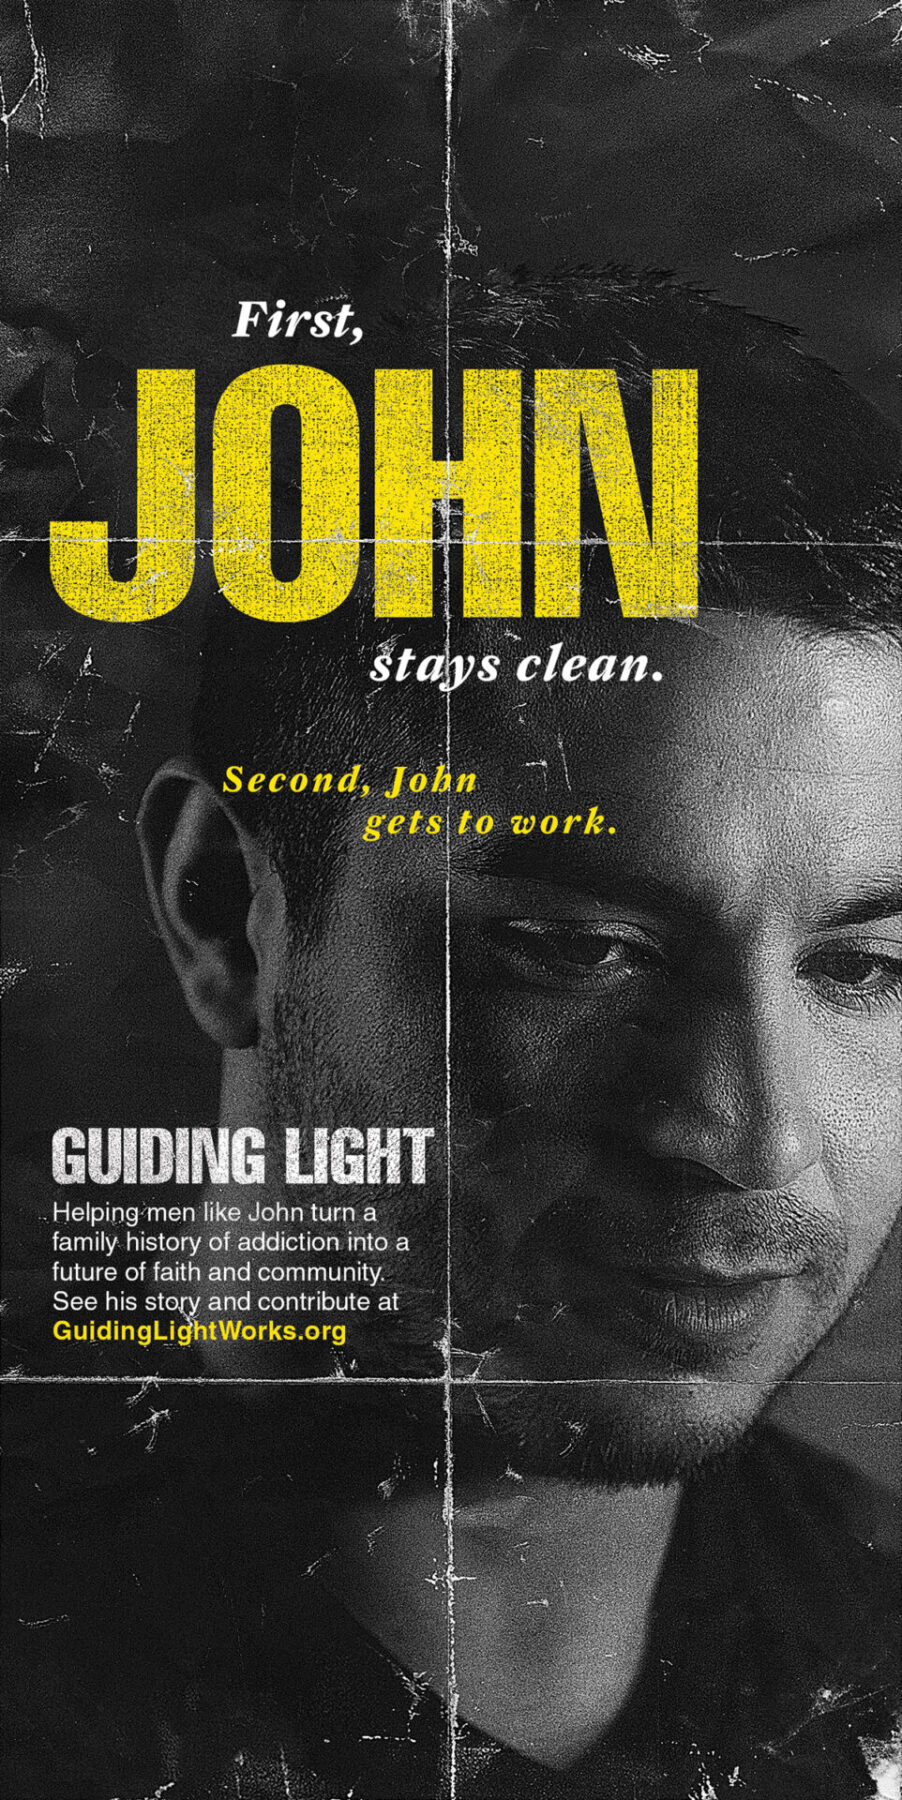 Out of home mall kiosk advertisement with closeup black and white photo of a man and the headline "First, John stays clean. Second, John gets to work."